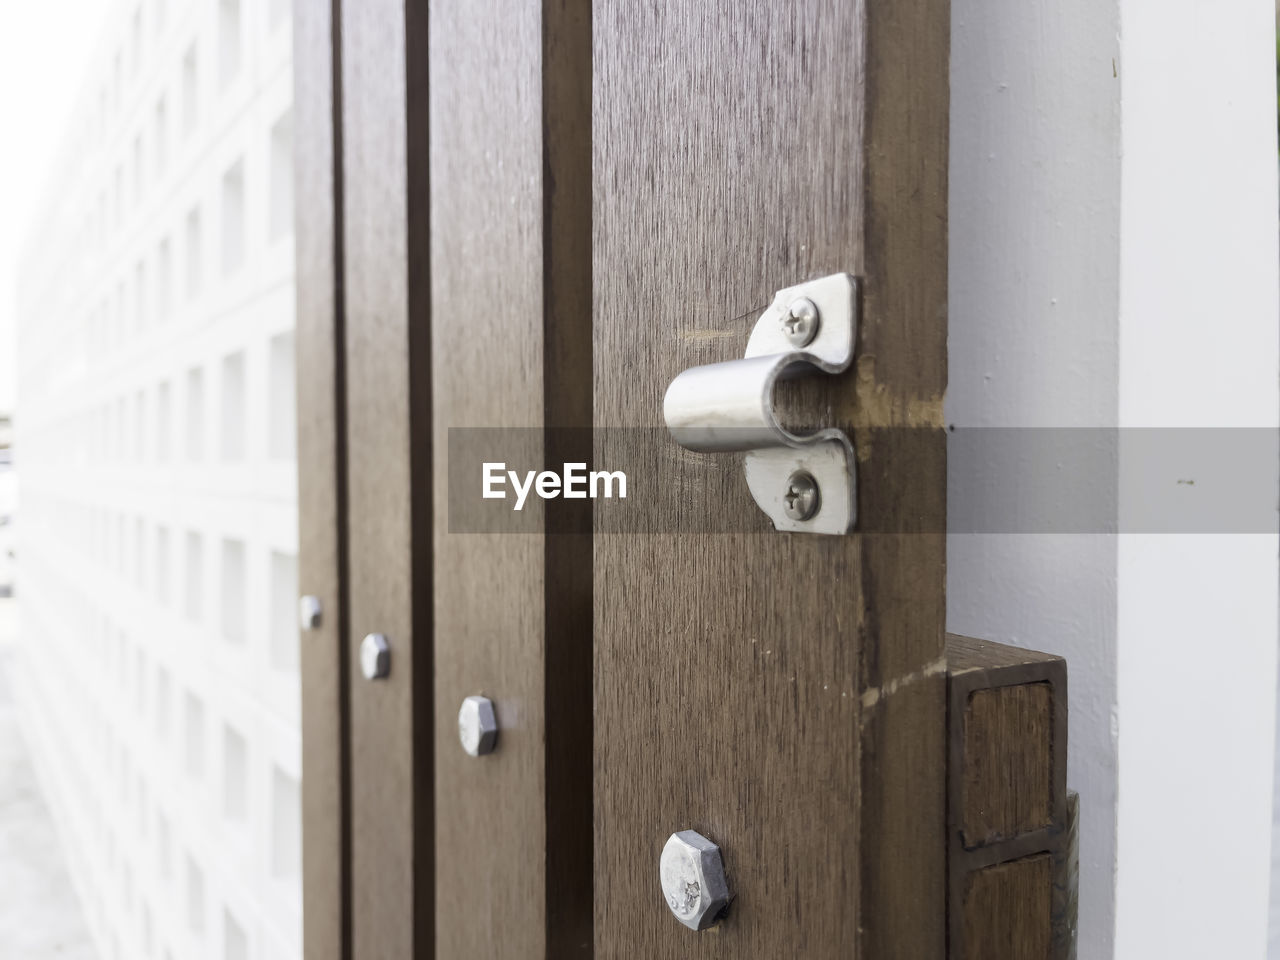 security, door, protection, entrance, lock, closed, wood, door handle, doorknob, knob, furniture, white, keyhole, no people, handle, metal, architecture, close-up, day, building, wall, built structure, room, outdoors, doorway, privacy, building exterior, locker, padlock, security system